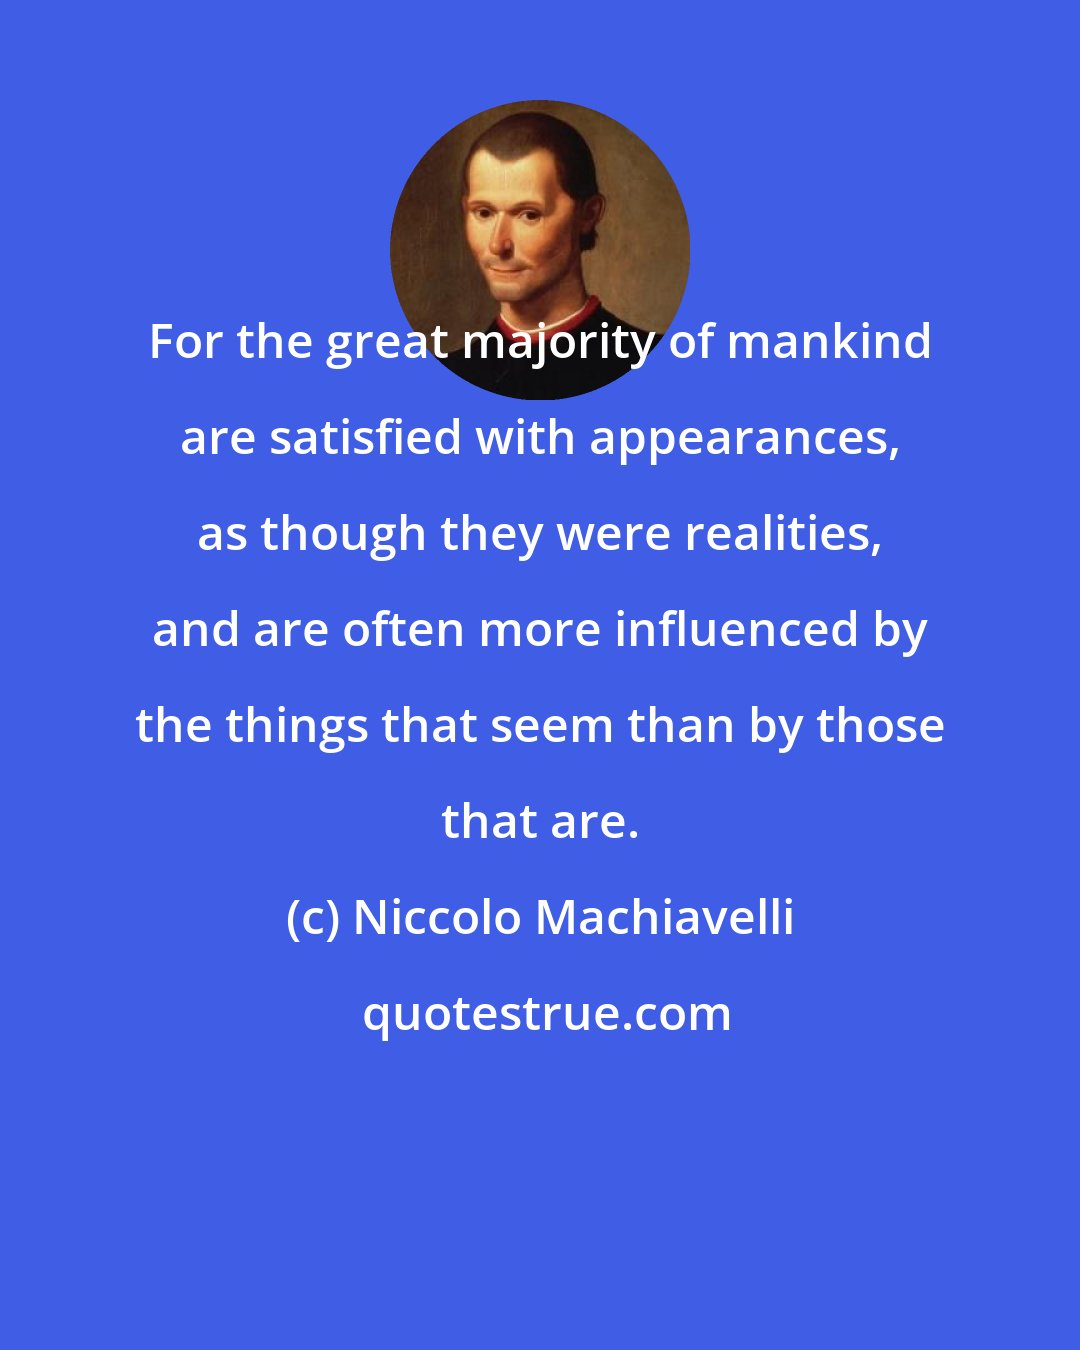 Niccolo Machiavelli: For the great majority of mankind are satisfied with appearances, as though they were realities, and are often more influenced by the things that seem than by those that are.